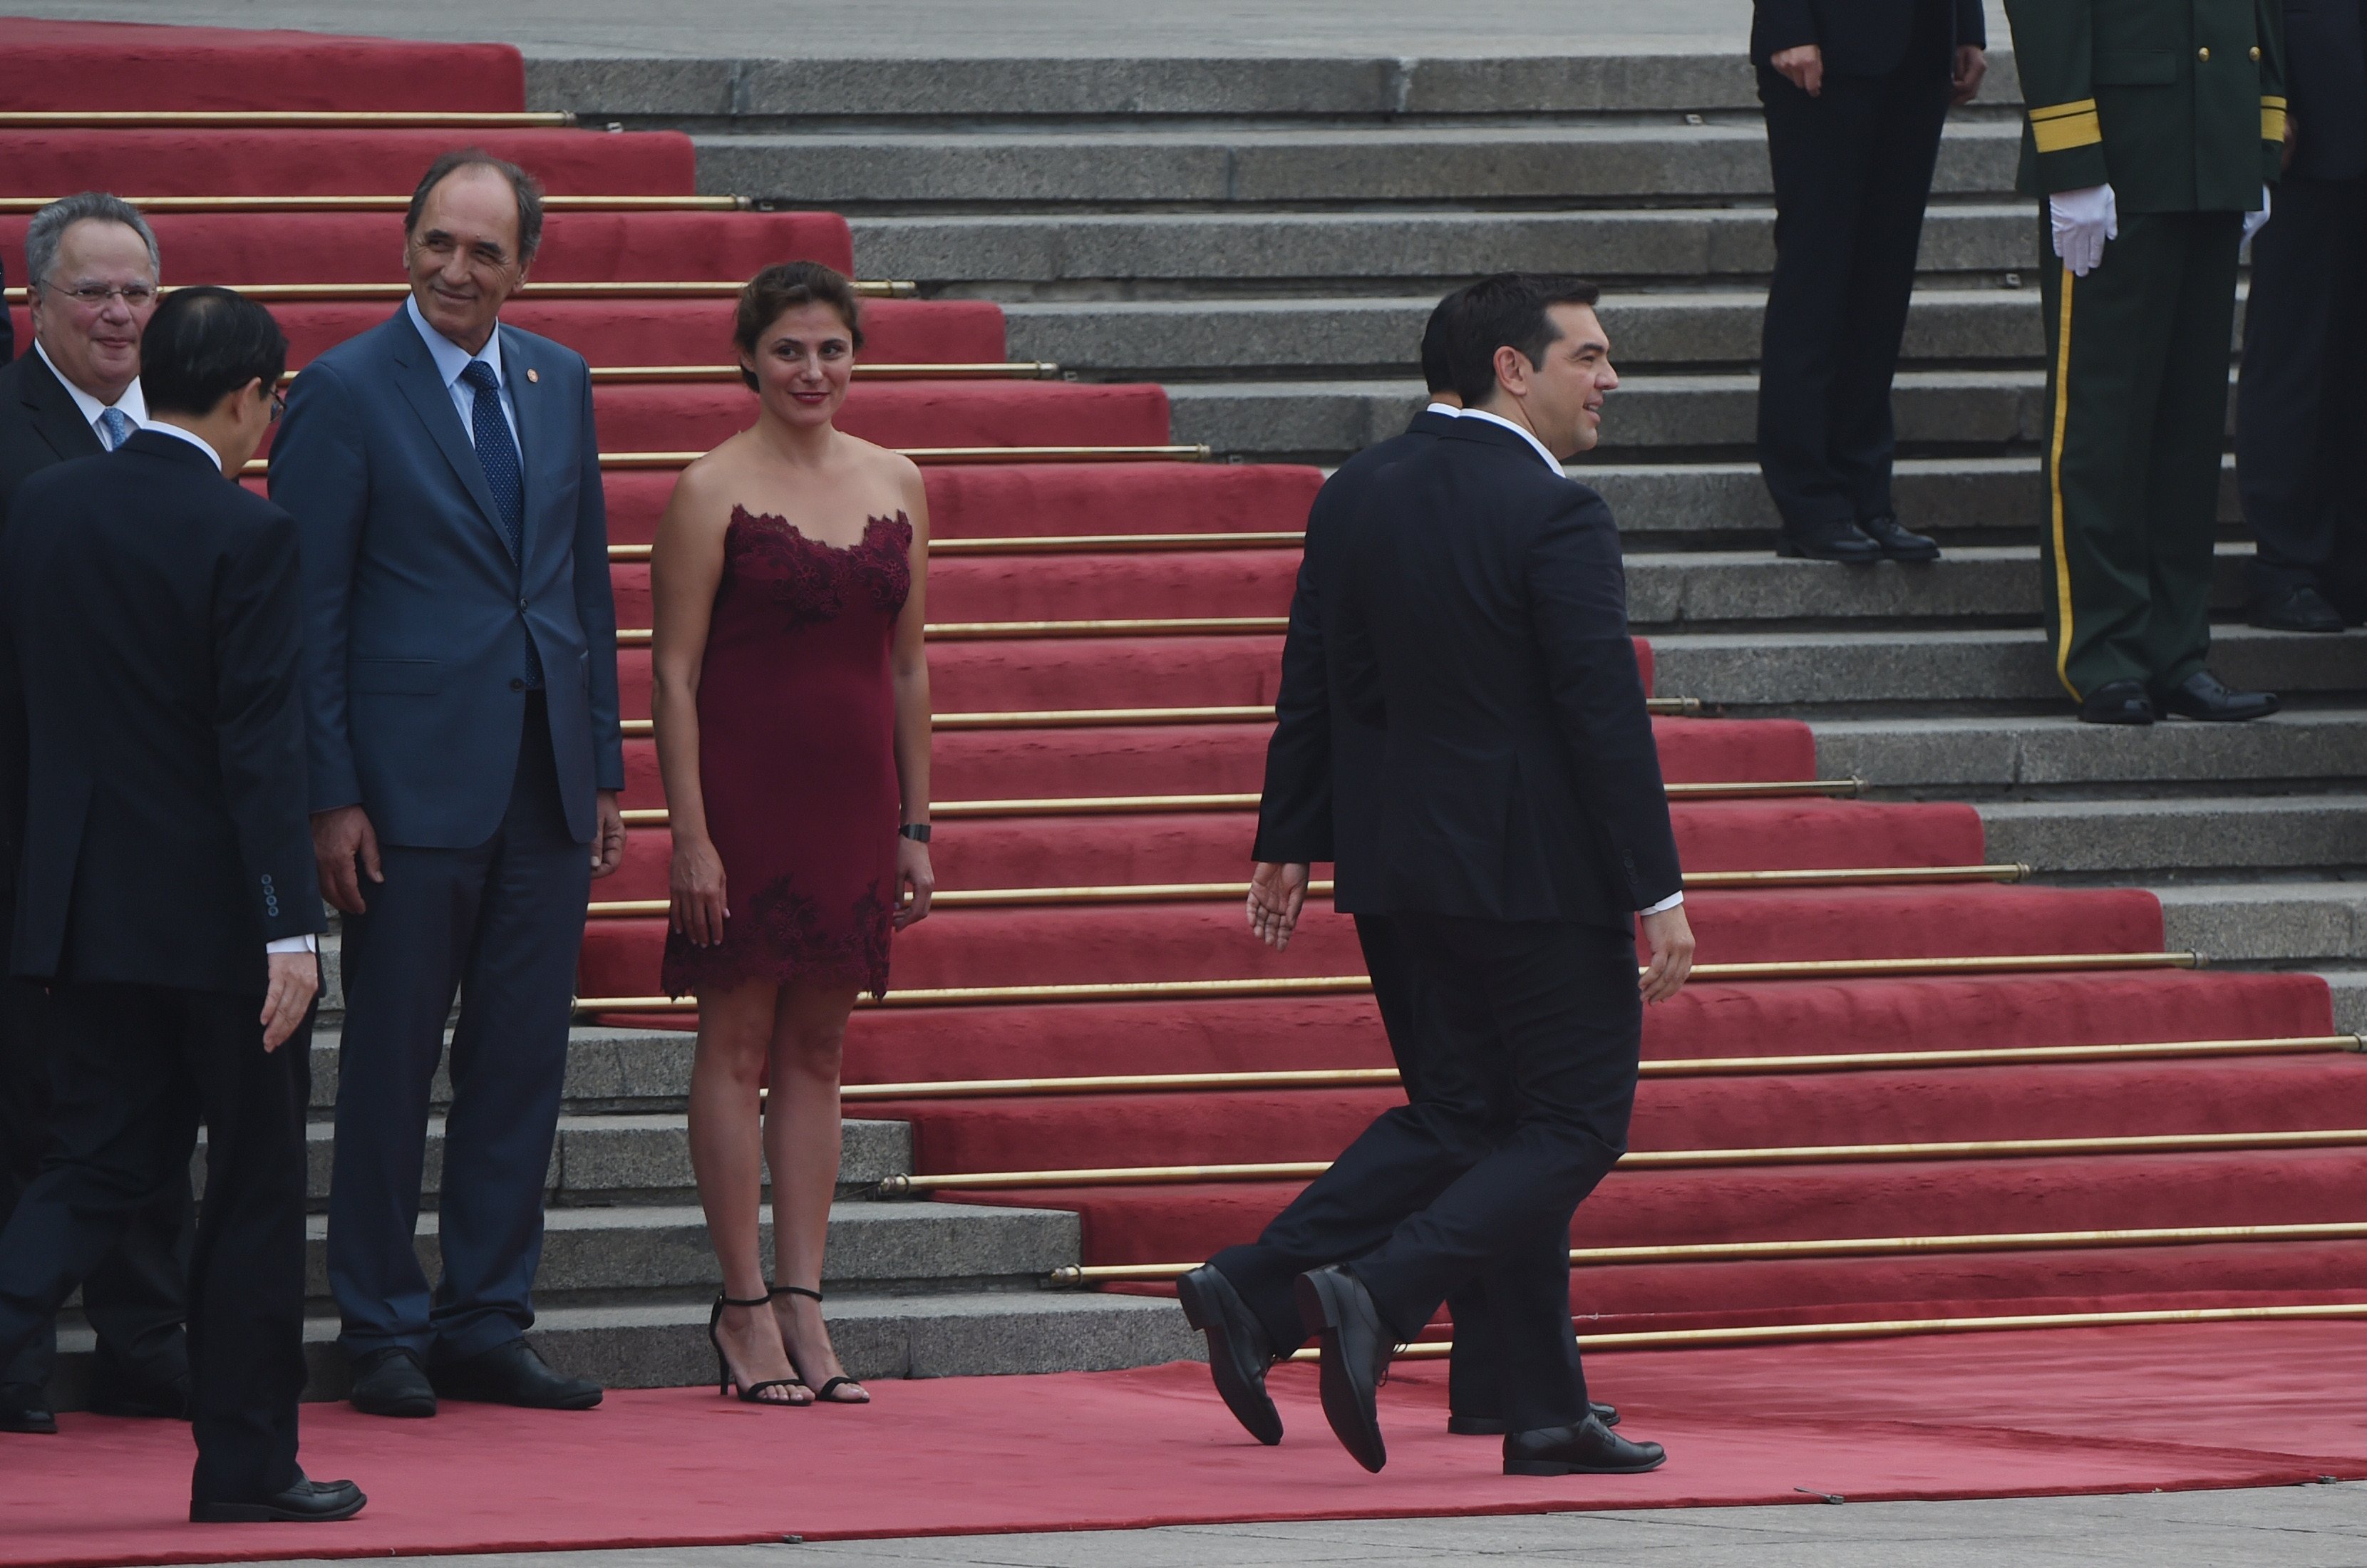 Greek Prime Minister Alexis Tsipras (R) walks with Chinese Premier Li Keqiang (obscured) as Tsipras' partner Betty Batziana (4th L) looks on during a welcome ceremony outside the Great Hall of the People in Beijing on July 4, 2016.  Tsipras is on a state visit to China. / AFP / GREG BAKER        (Photo credit should read GREG BAKER/AFP/Getty Images)